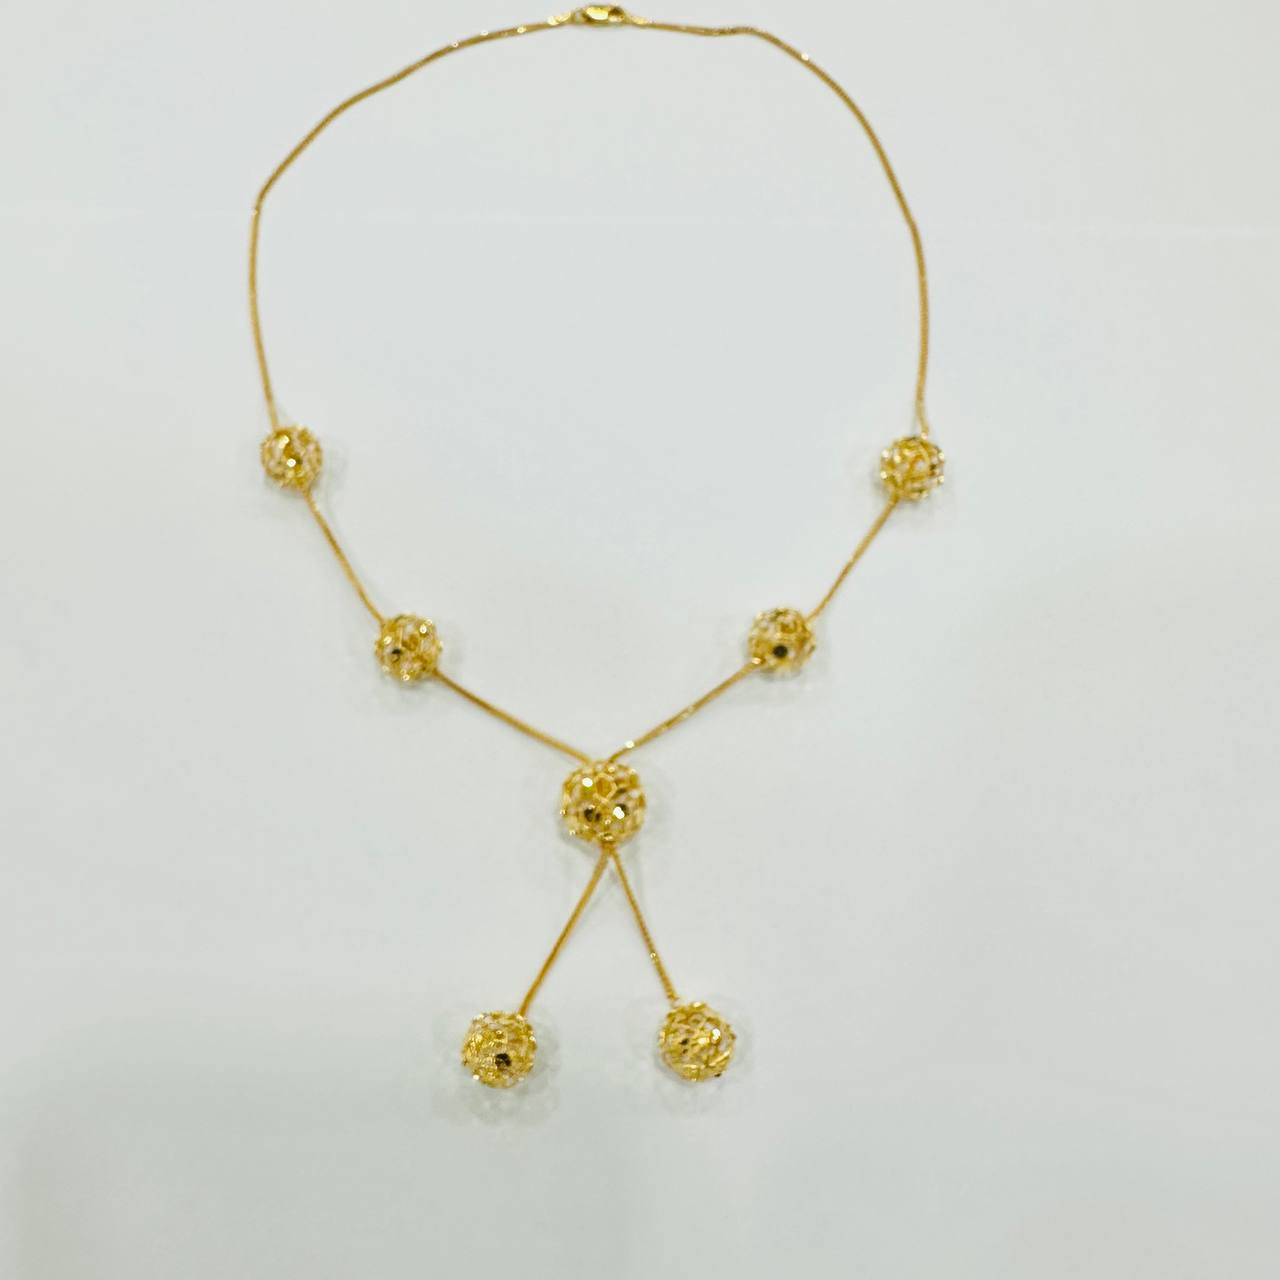 22k / 916 Gold Ball Necklace with Ball Pendant-Necklaces-Best Gold Shop